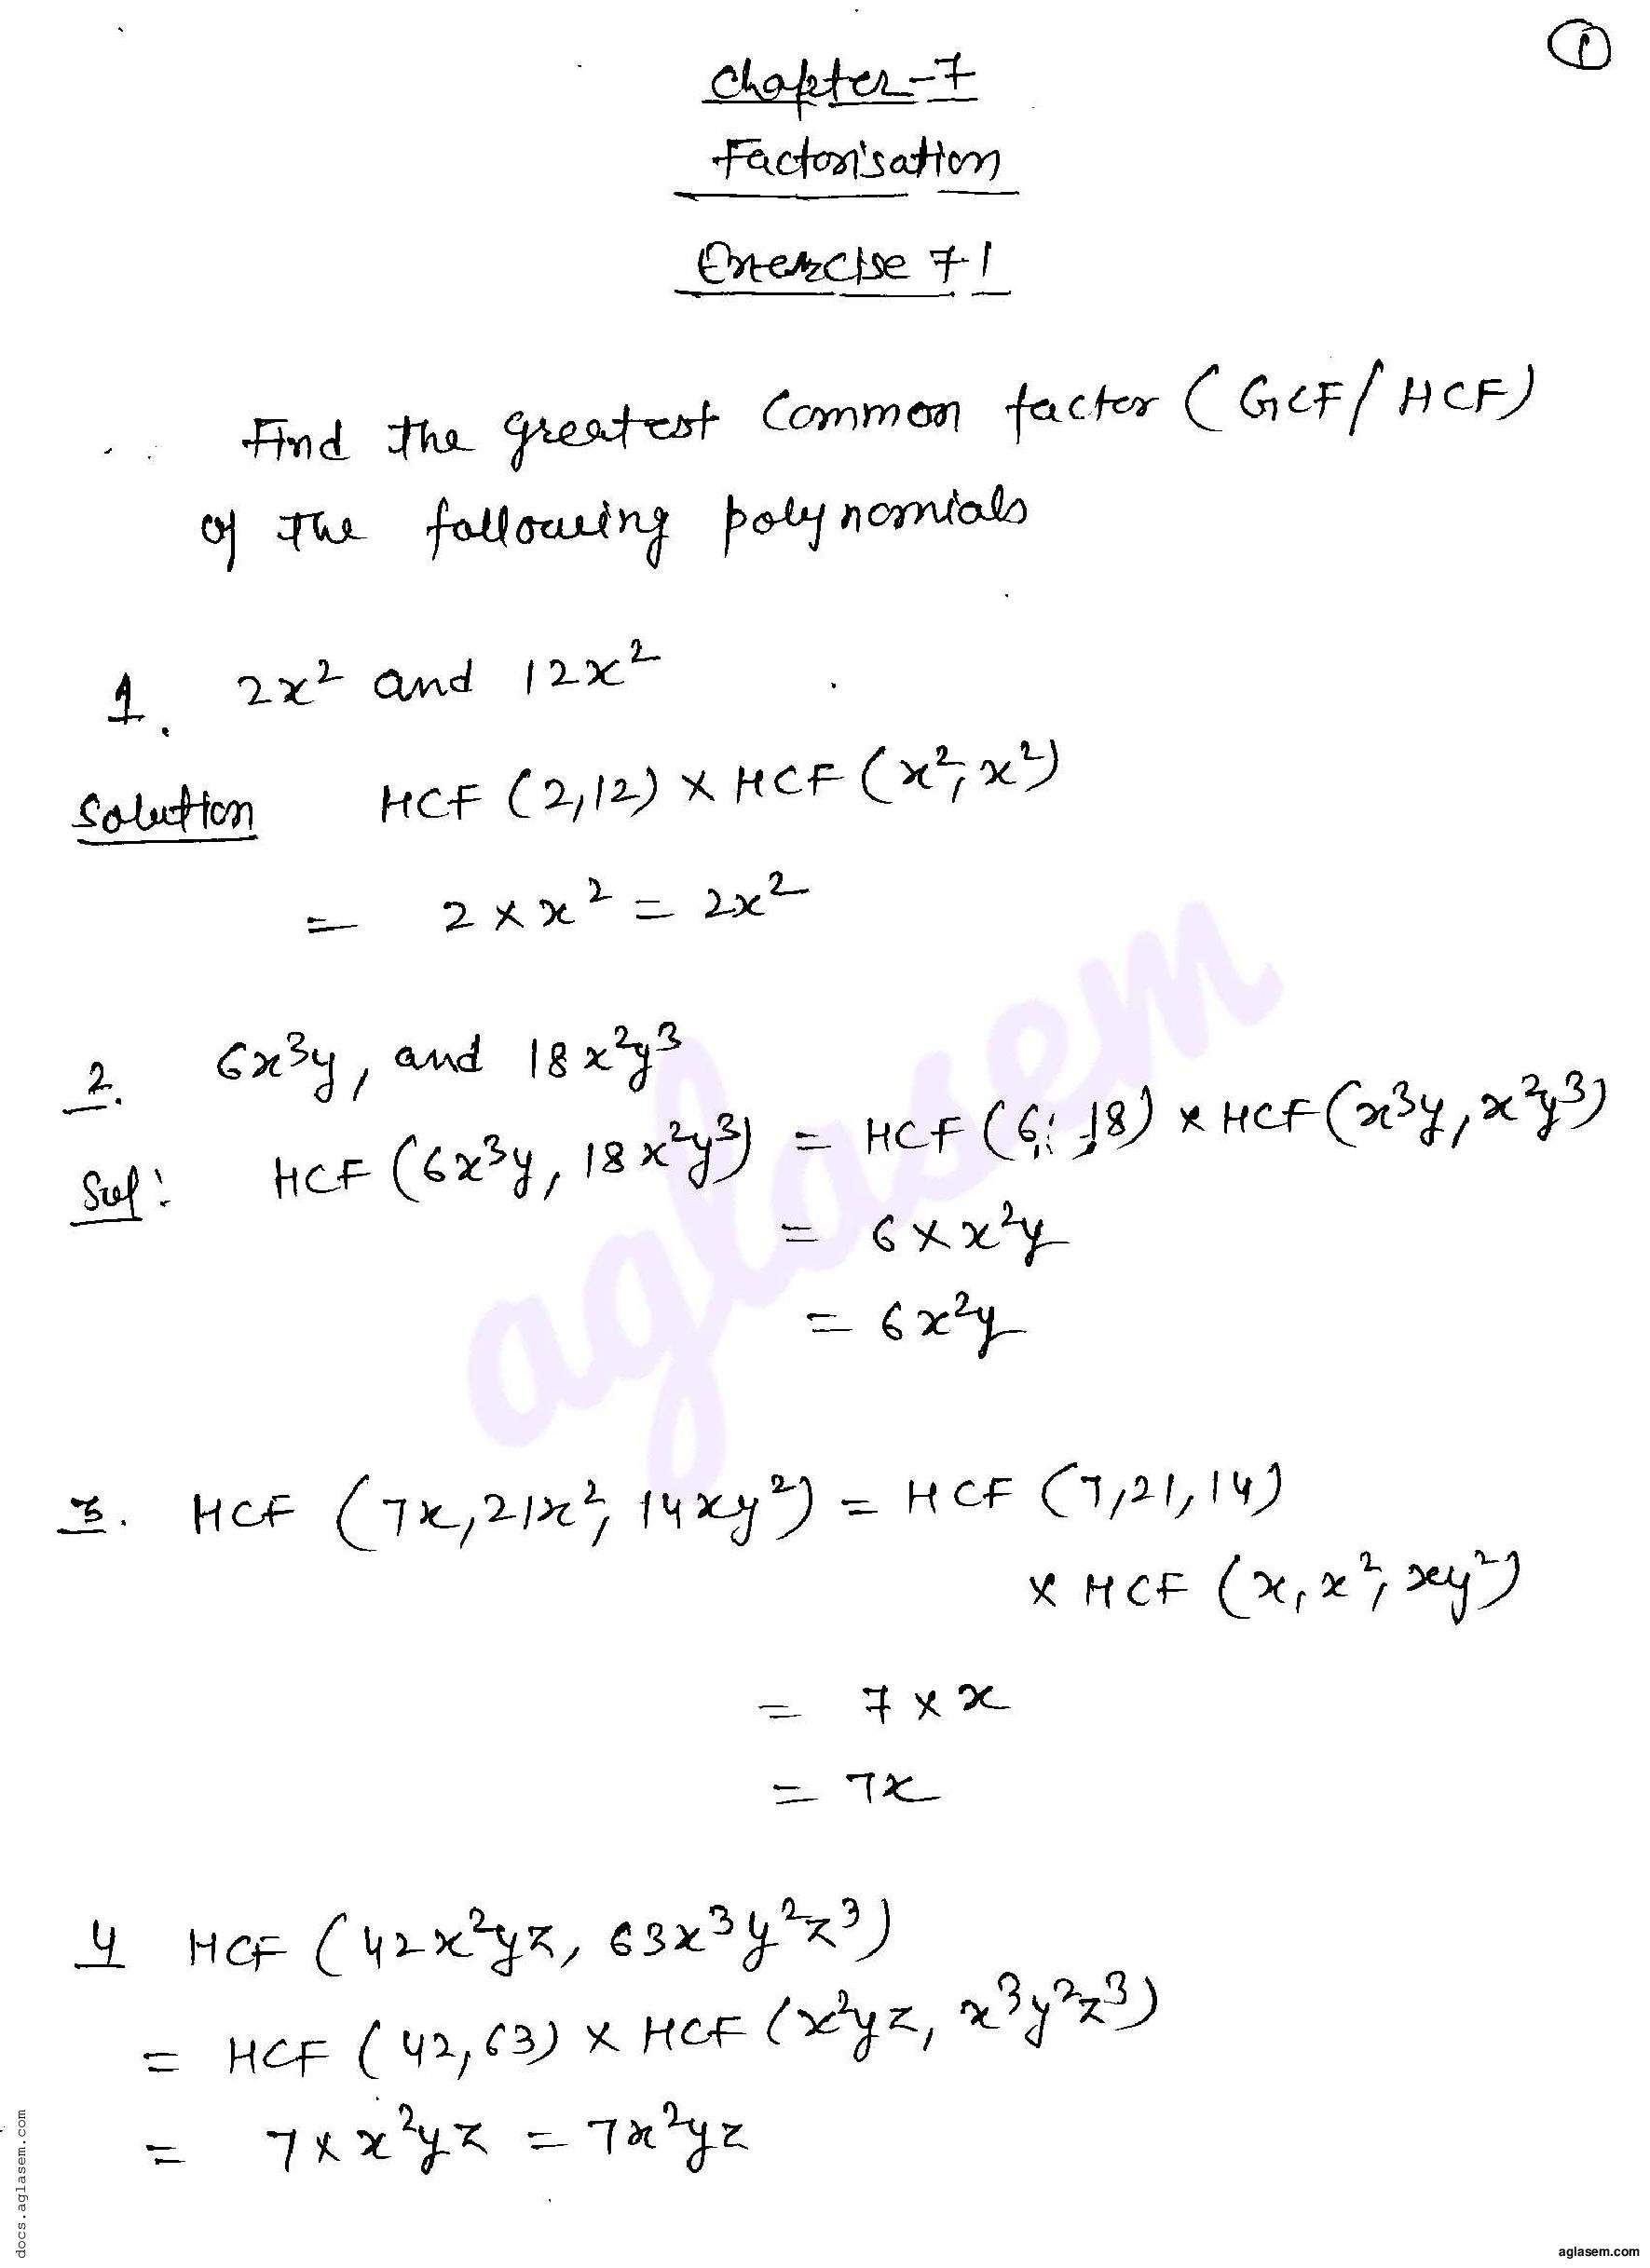 RD Sharma Solutions Class 8 Chapter 7 Factorization Exercise 7.1 - Page 1